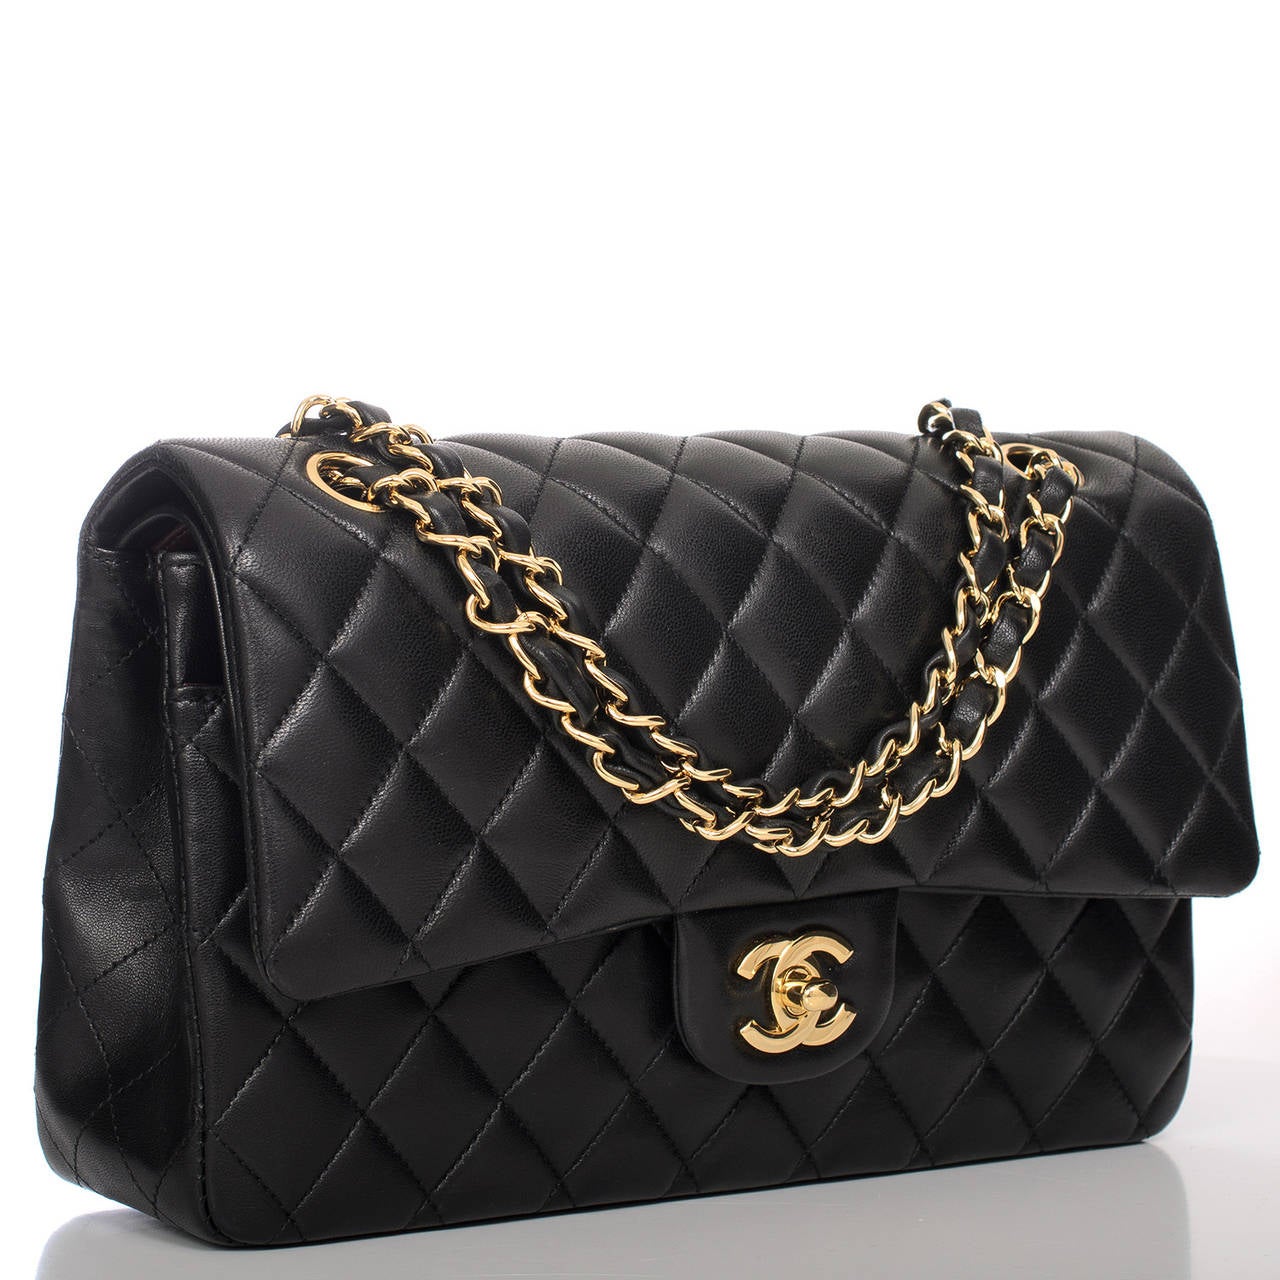 This Chanel Large Classic double flap marries smooth black lambskin with gold tone hardware. The bag features a front flap with signature CC turnlock closure, half moon back pocket and an adjustable interwoven gold tone chain link and black leather